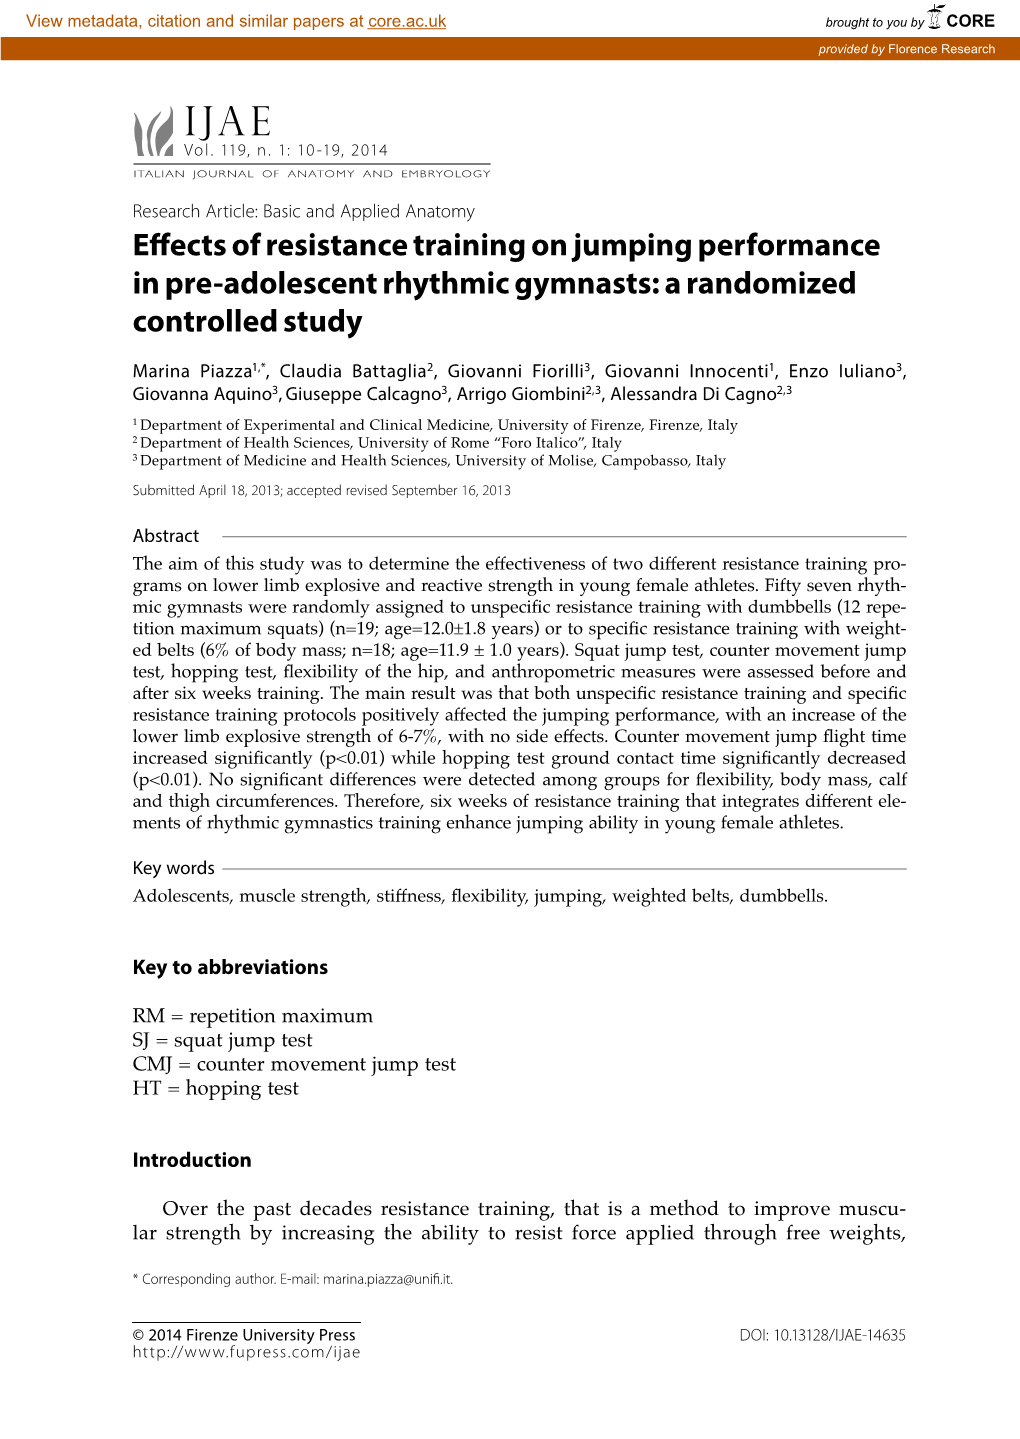 Effects of Resistance Training on Jumping Performance in Pre-Adolescent Rhythmic Gymnasts: a Randomized Controlled Study